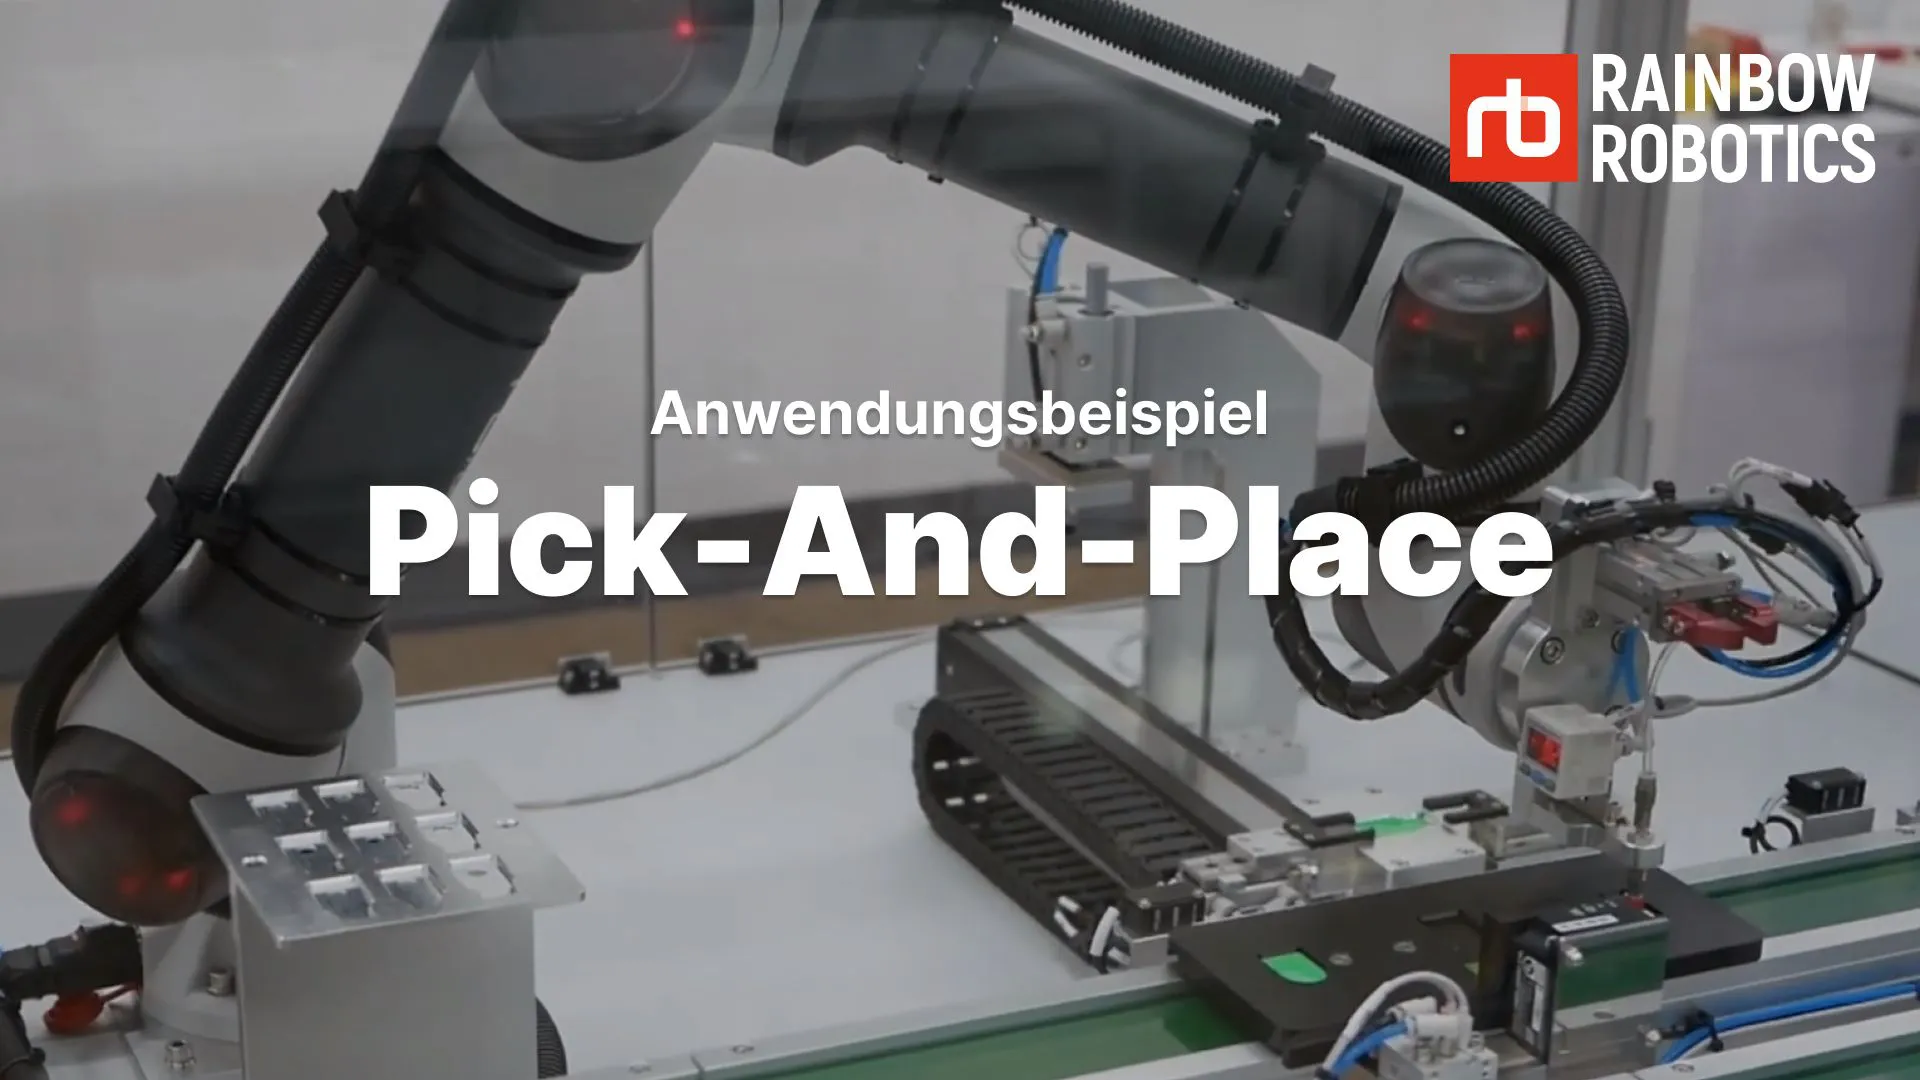 Thumbnail of Pick-And-Place example application of Rainbow Robotics Cobots